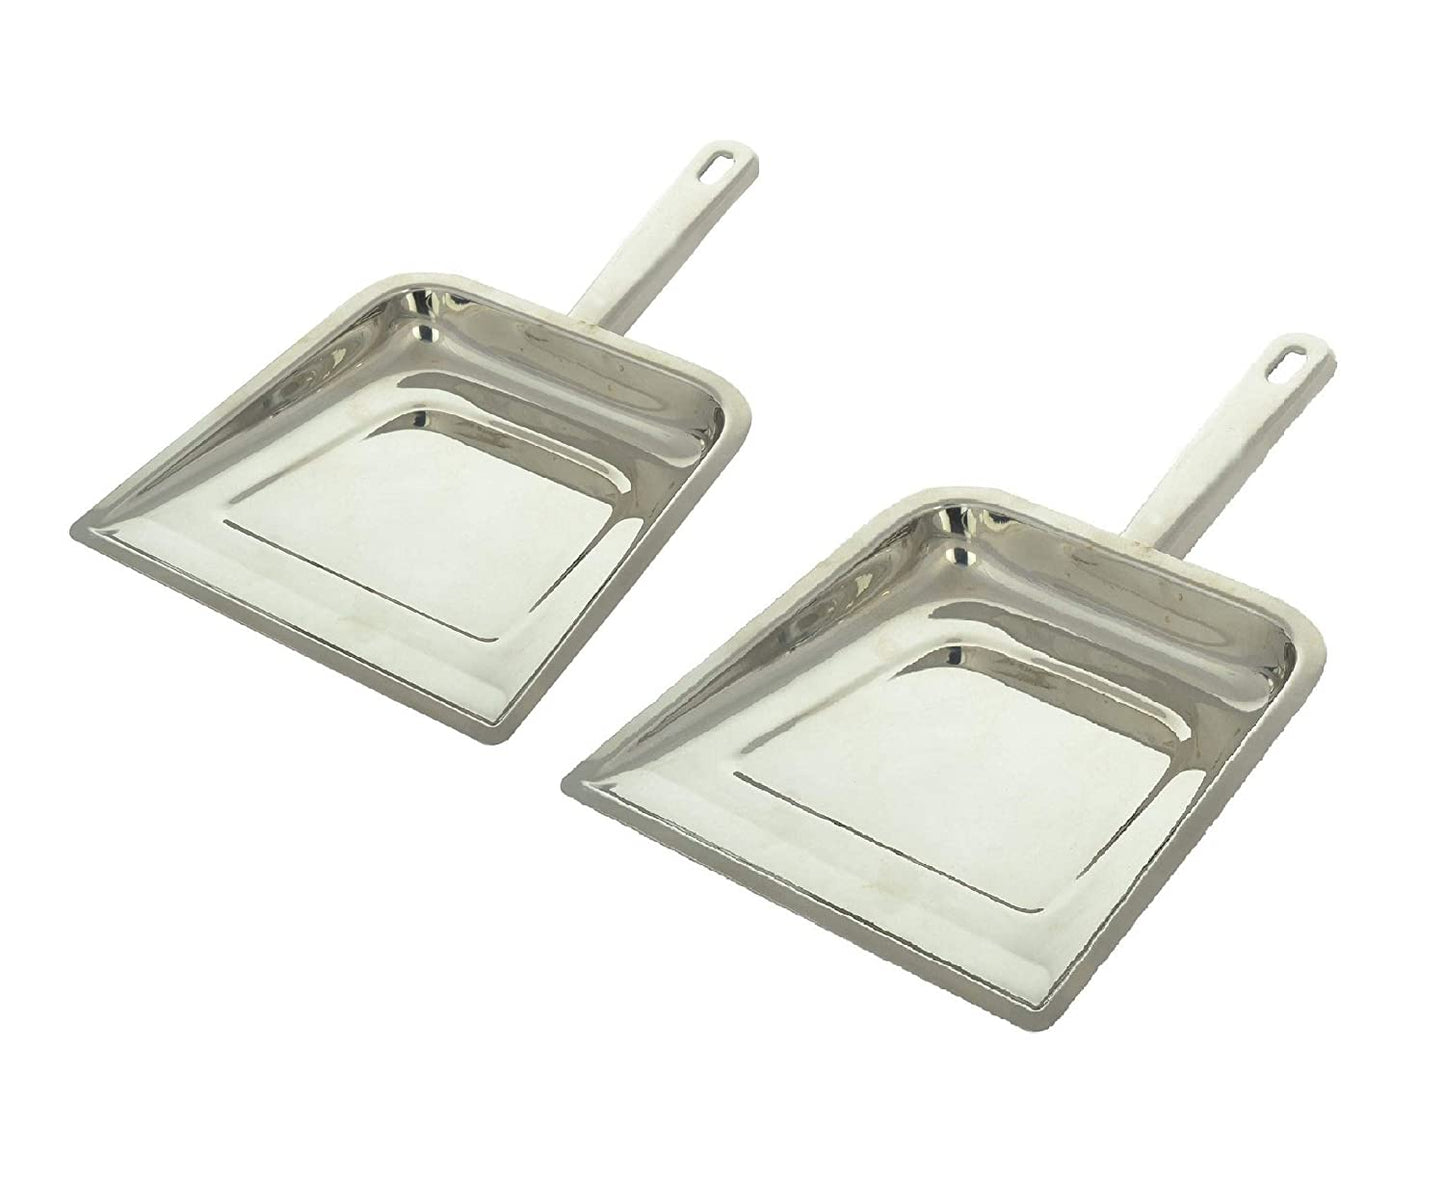 Stainless Steel Dustpan, Dust Collection Dust Pan Tray for Kitchen, Home, Office, Bathroom Etc - Pack of 2( Silver )